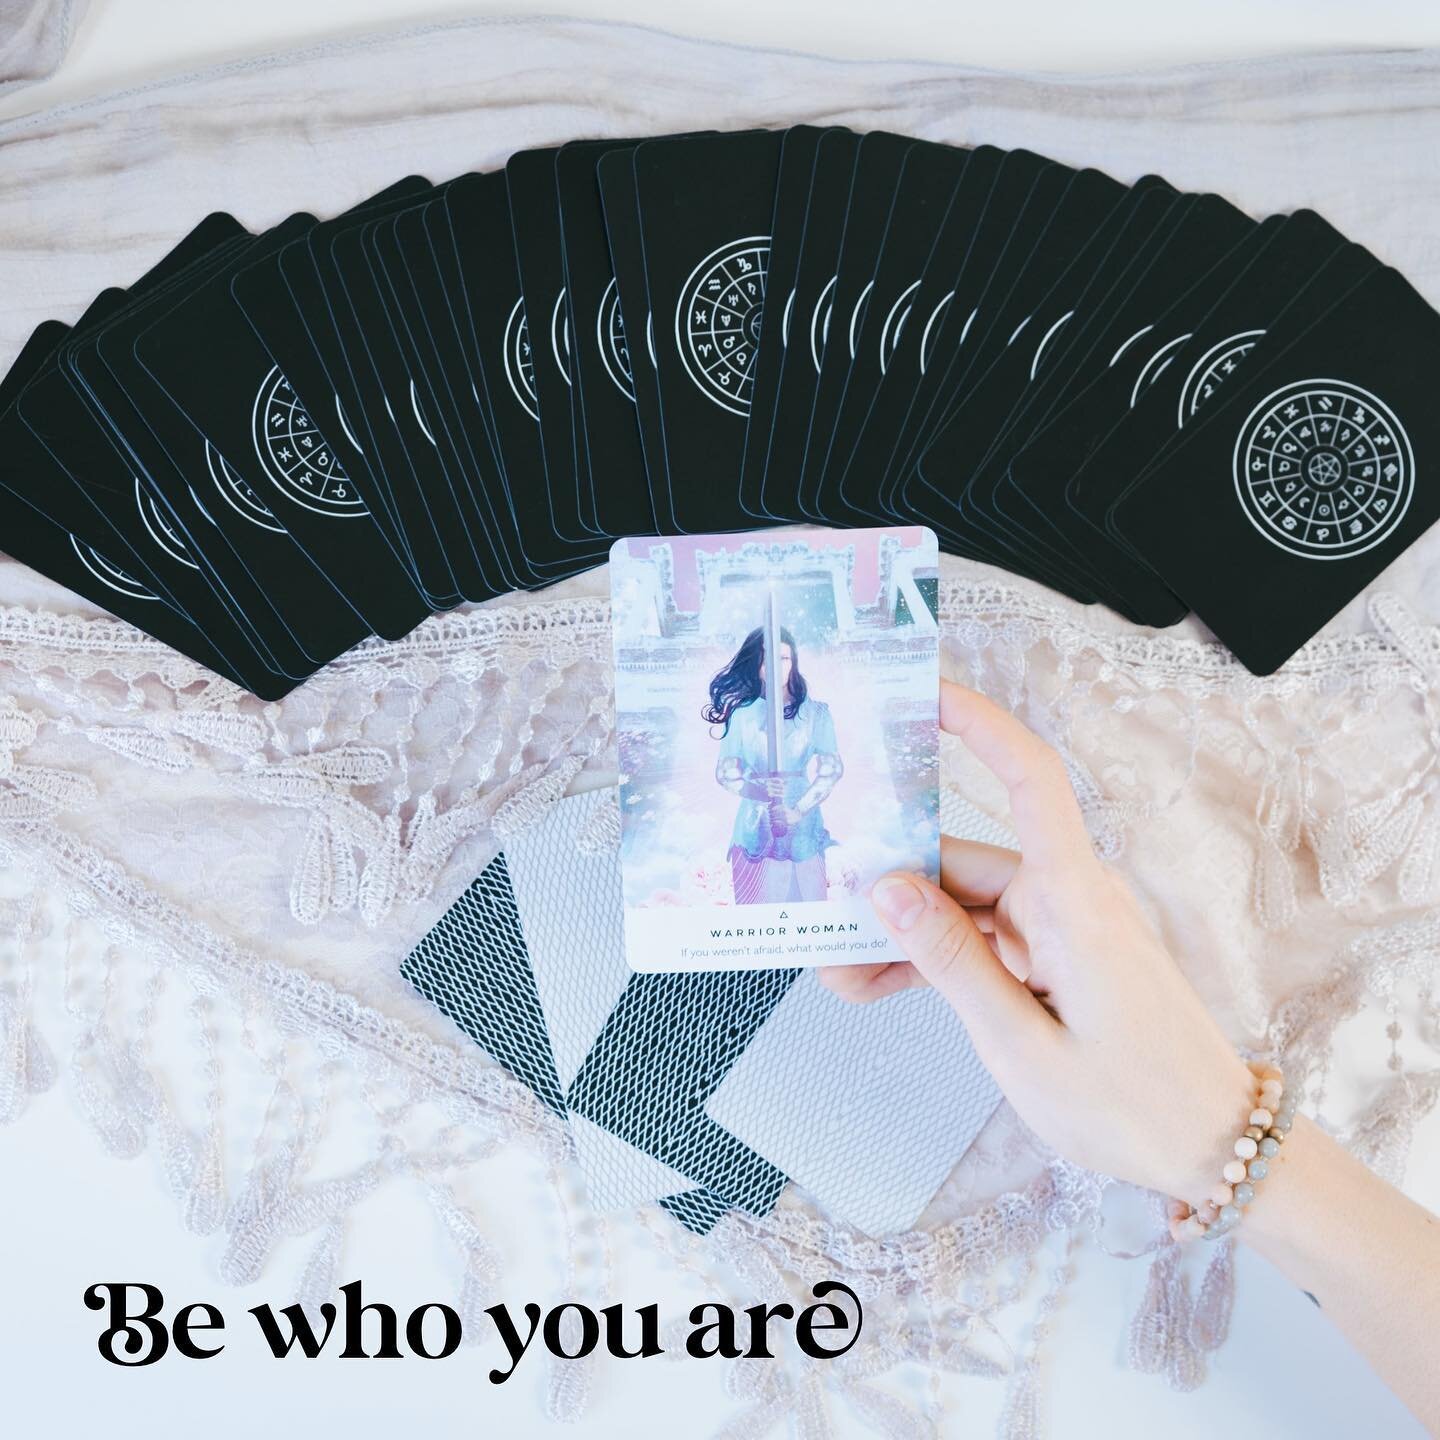 Be who you are&hellip; 

It sound so simple &amp; yet in practice can be so challenging. 

Who am I (&amp; why am I here) has been a contemplation for humanity since our conscious mind emerged.

So perhaps it isn&rsquo;t surprising how often this the